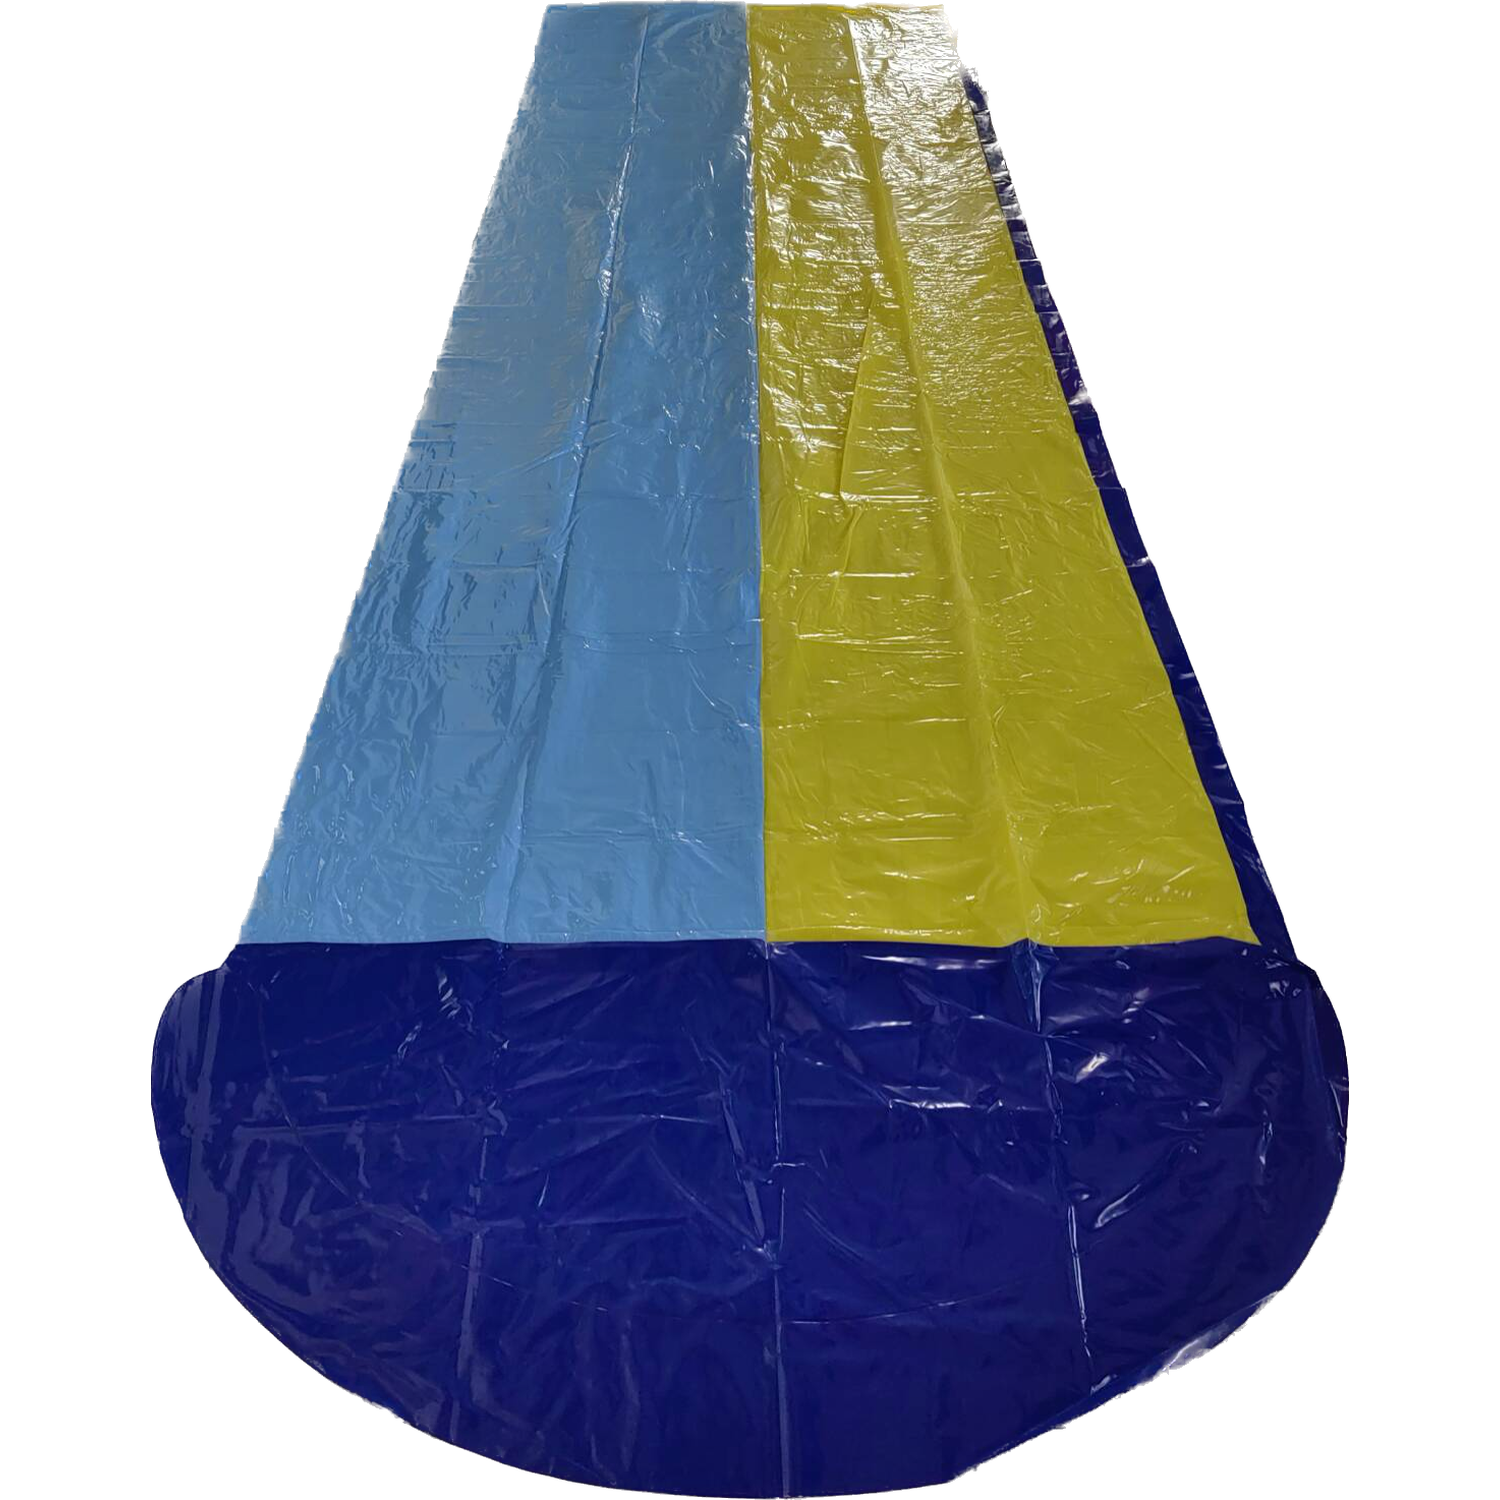 Water Slider and Surfboards - Blue Image 2